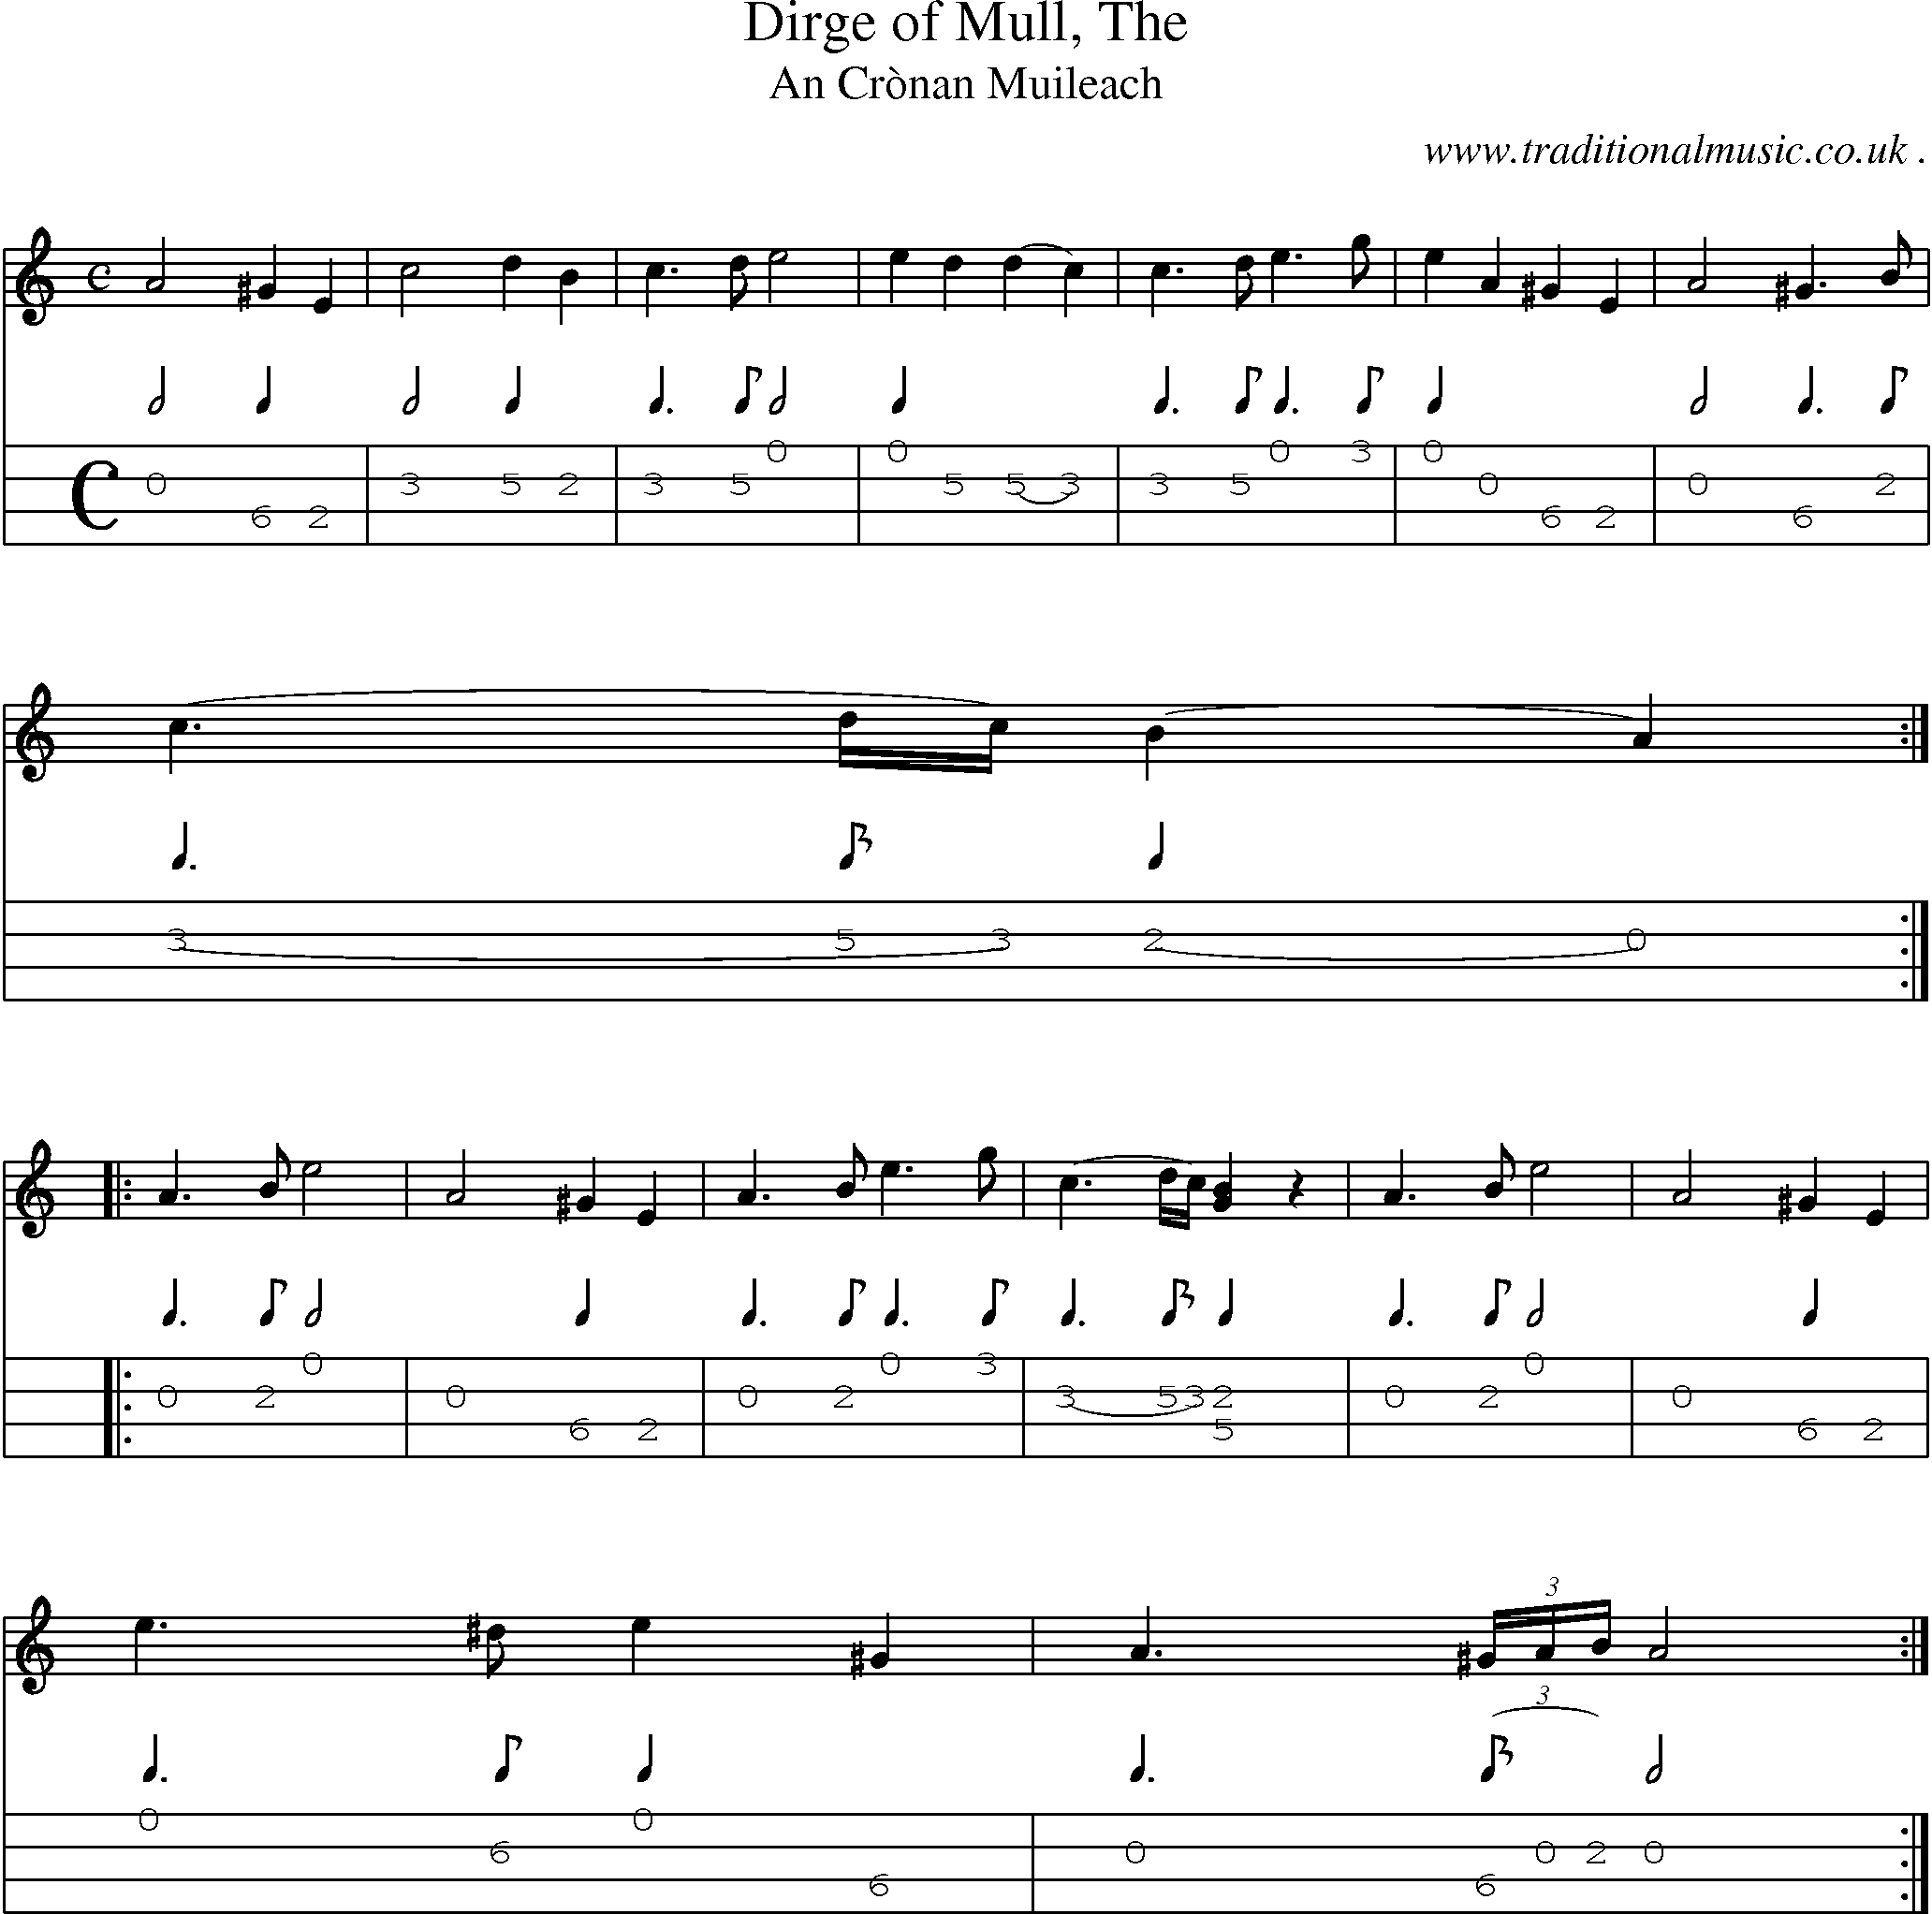 Sheet-music  score, Chords and Mandolin Tabs for Dirge Of Mull The